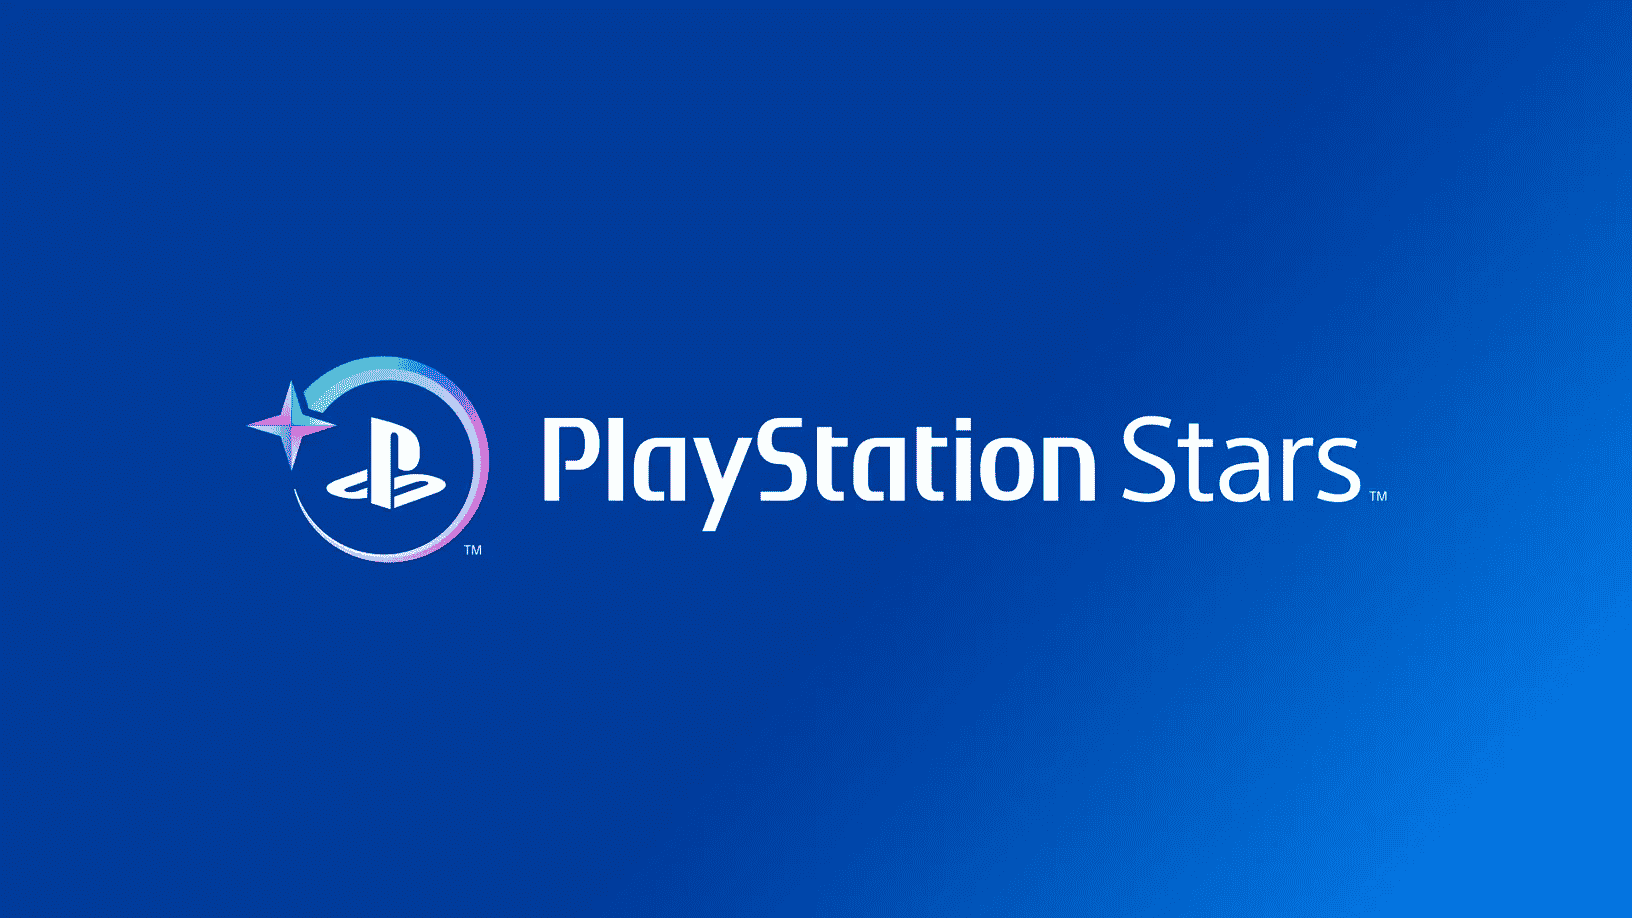 PlayStation Stars Loyalty Program & Digital Collectibles Announced; Not NFTs